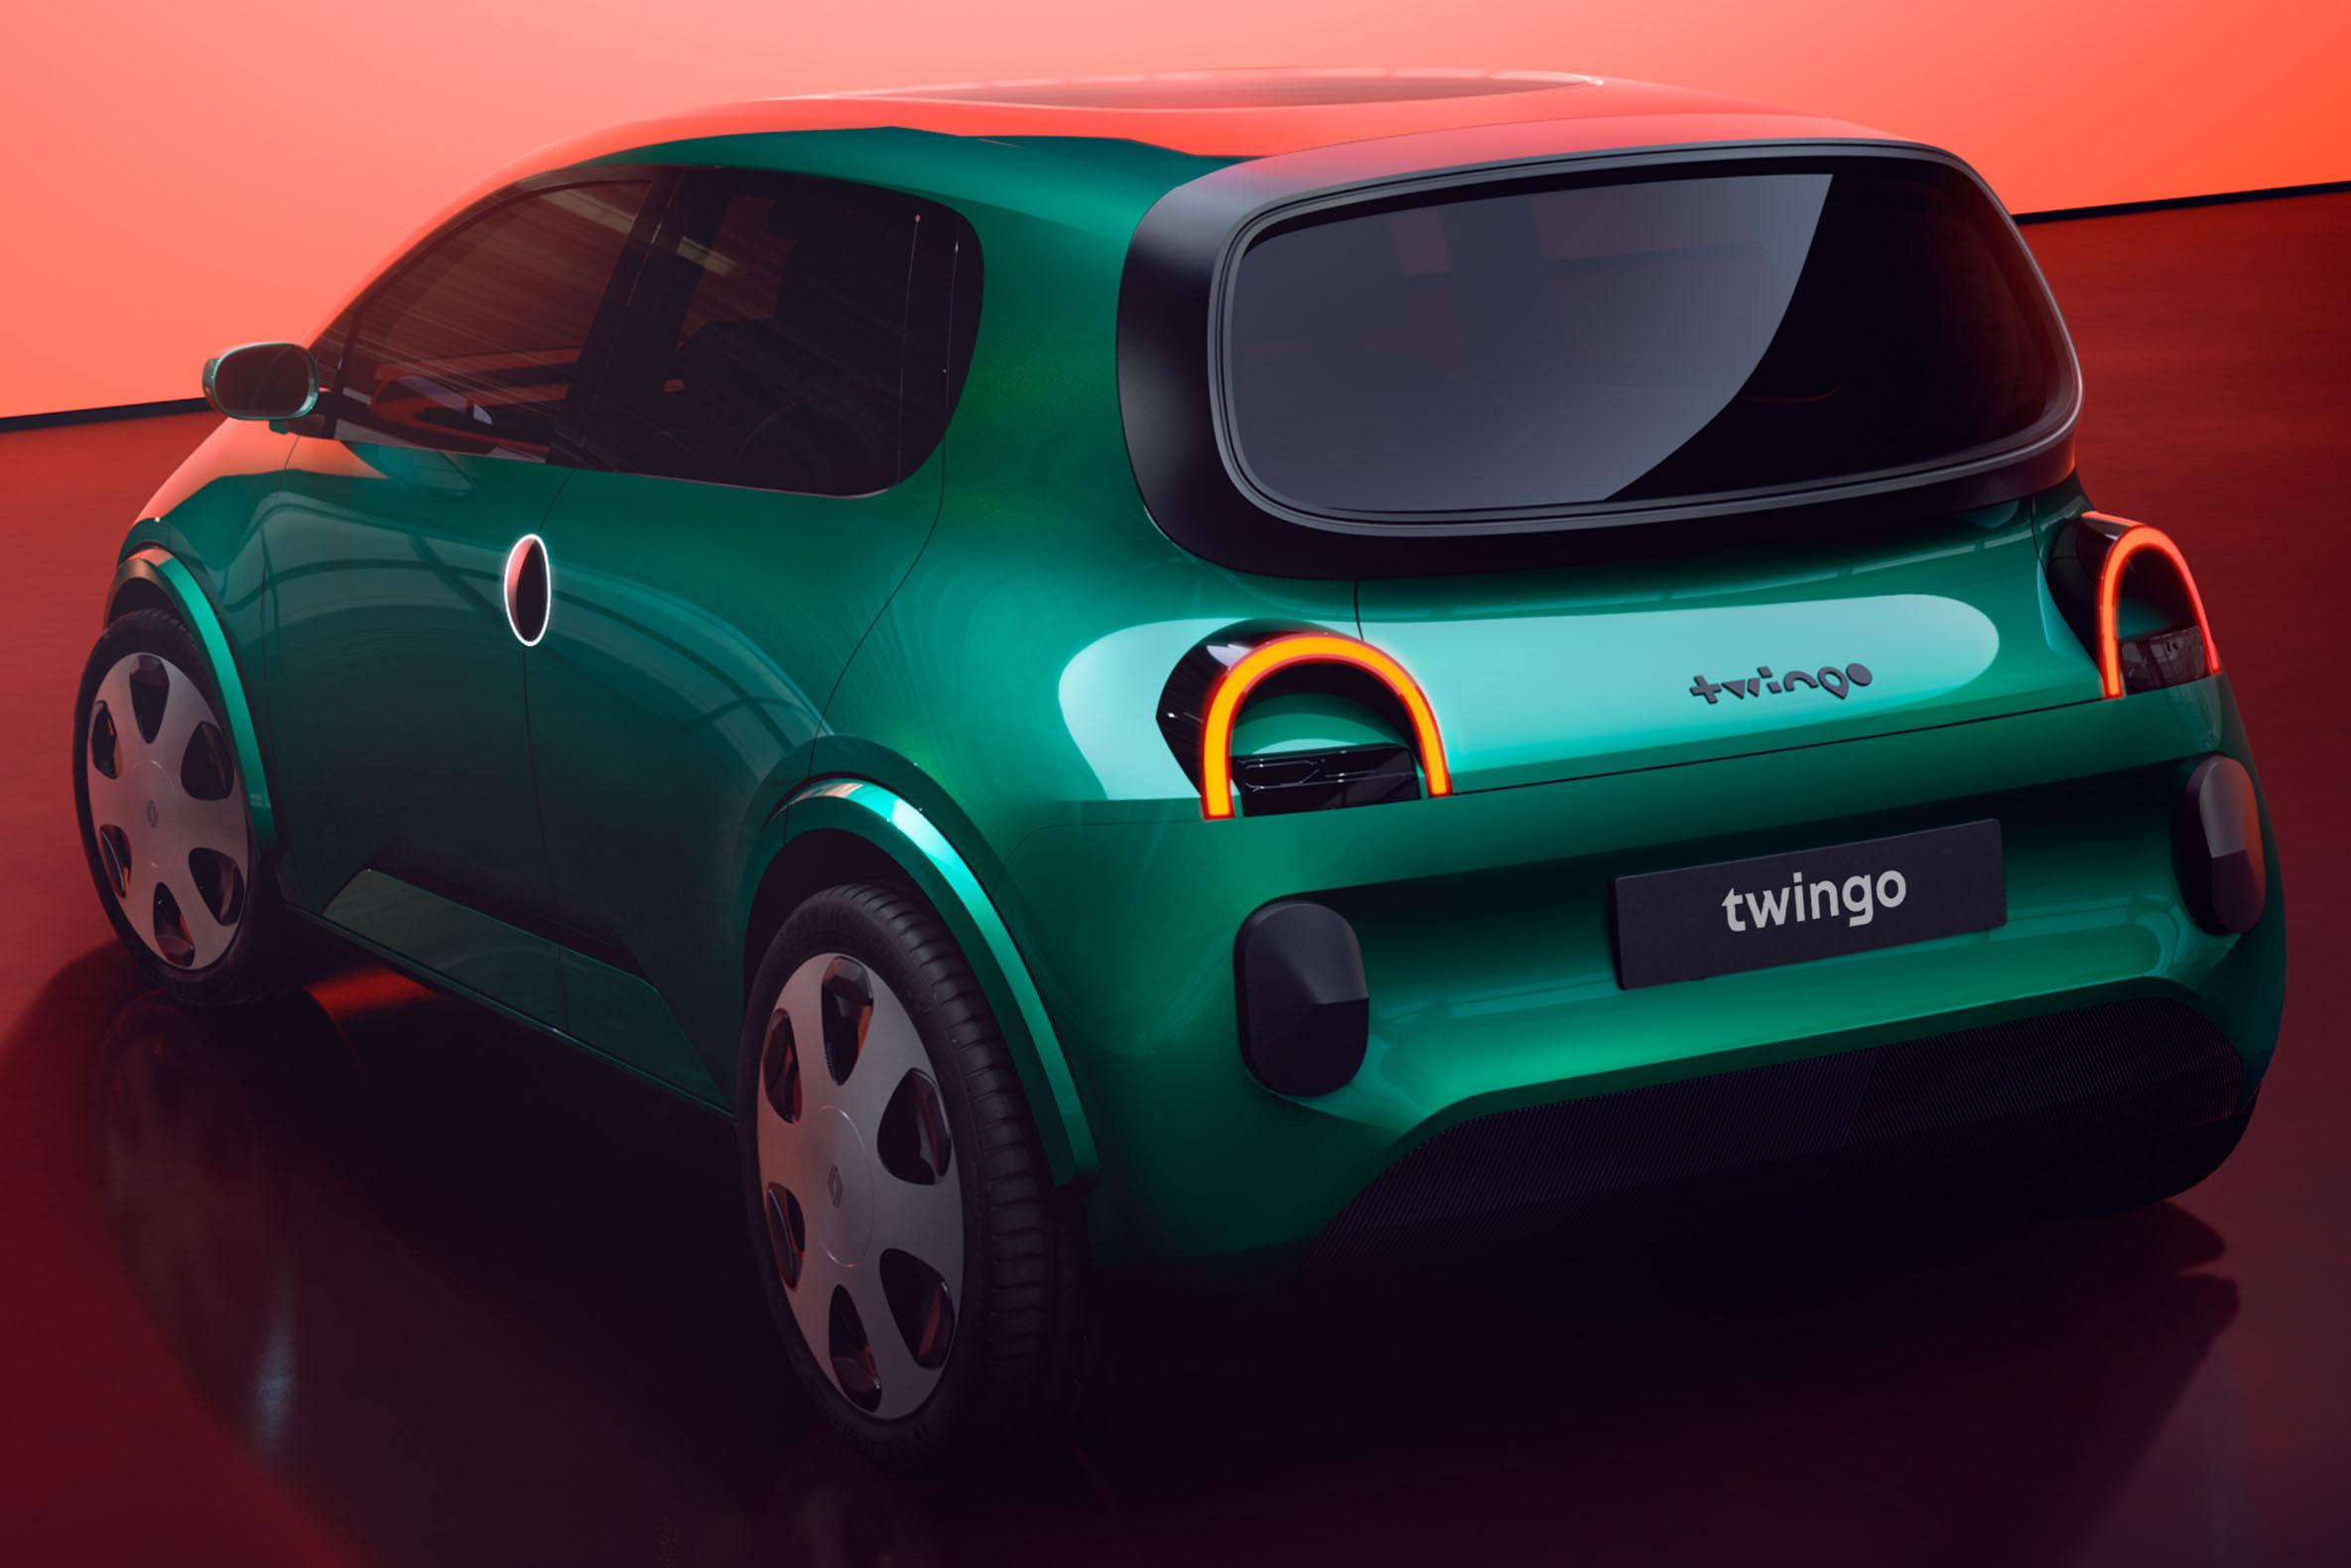 Renault goes retro with new electric-only Twingo